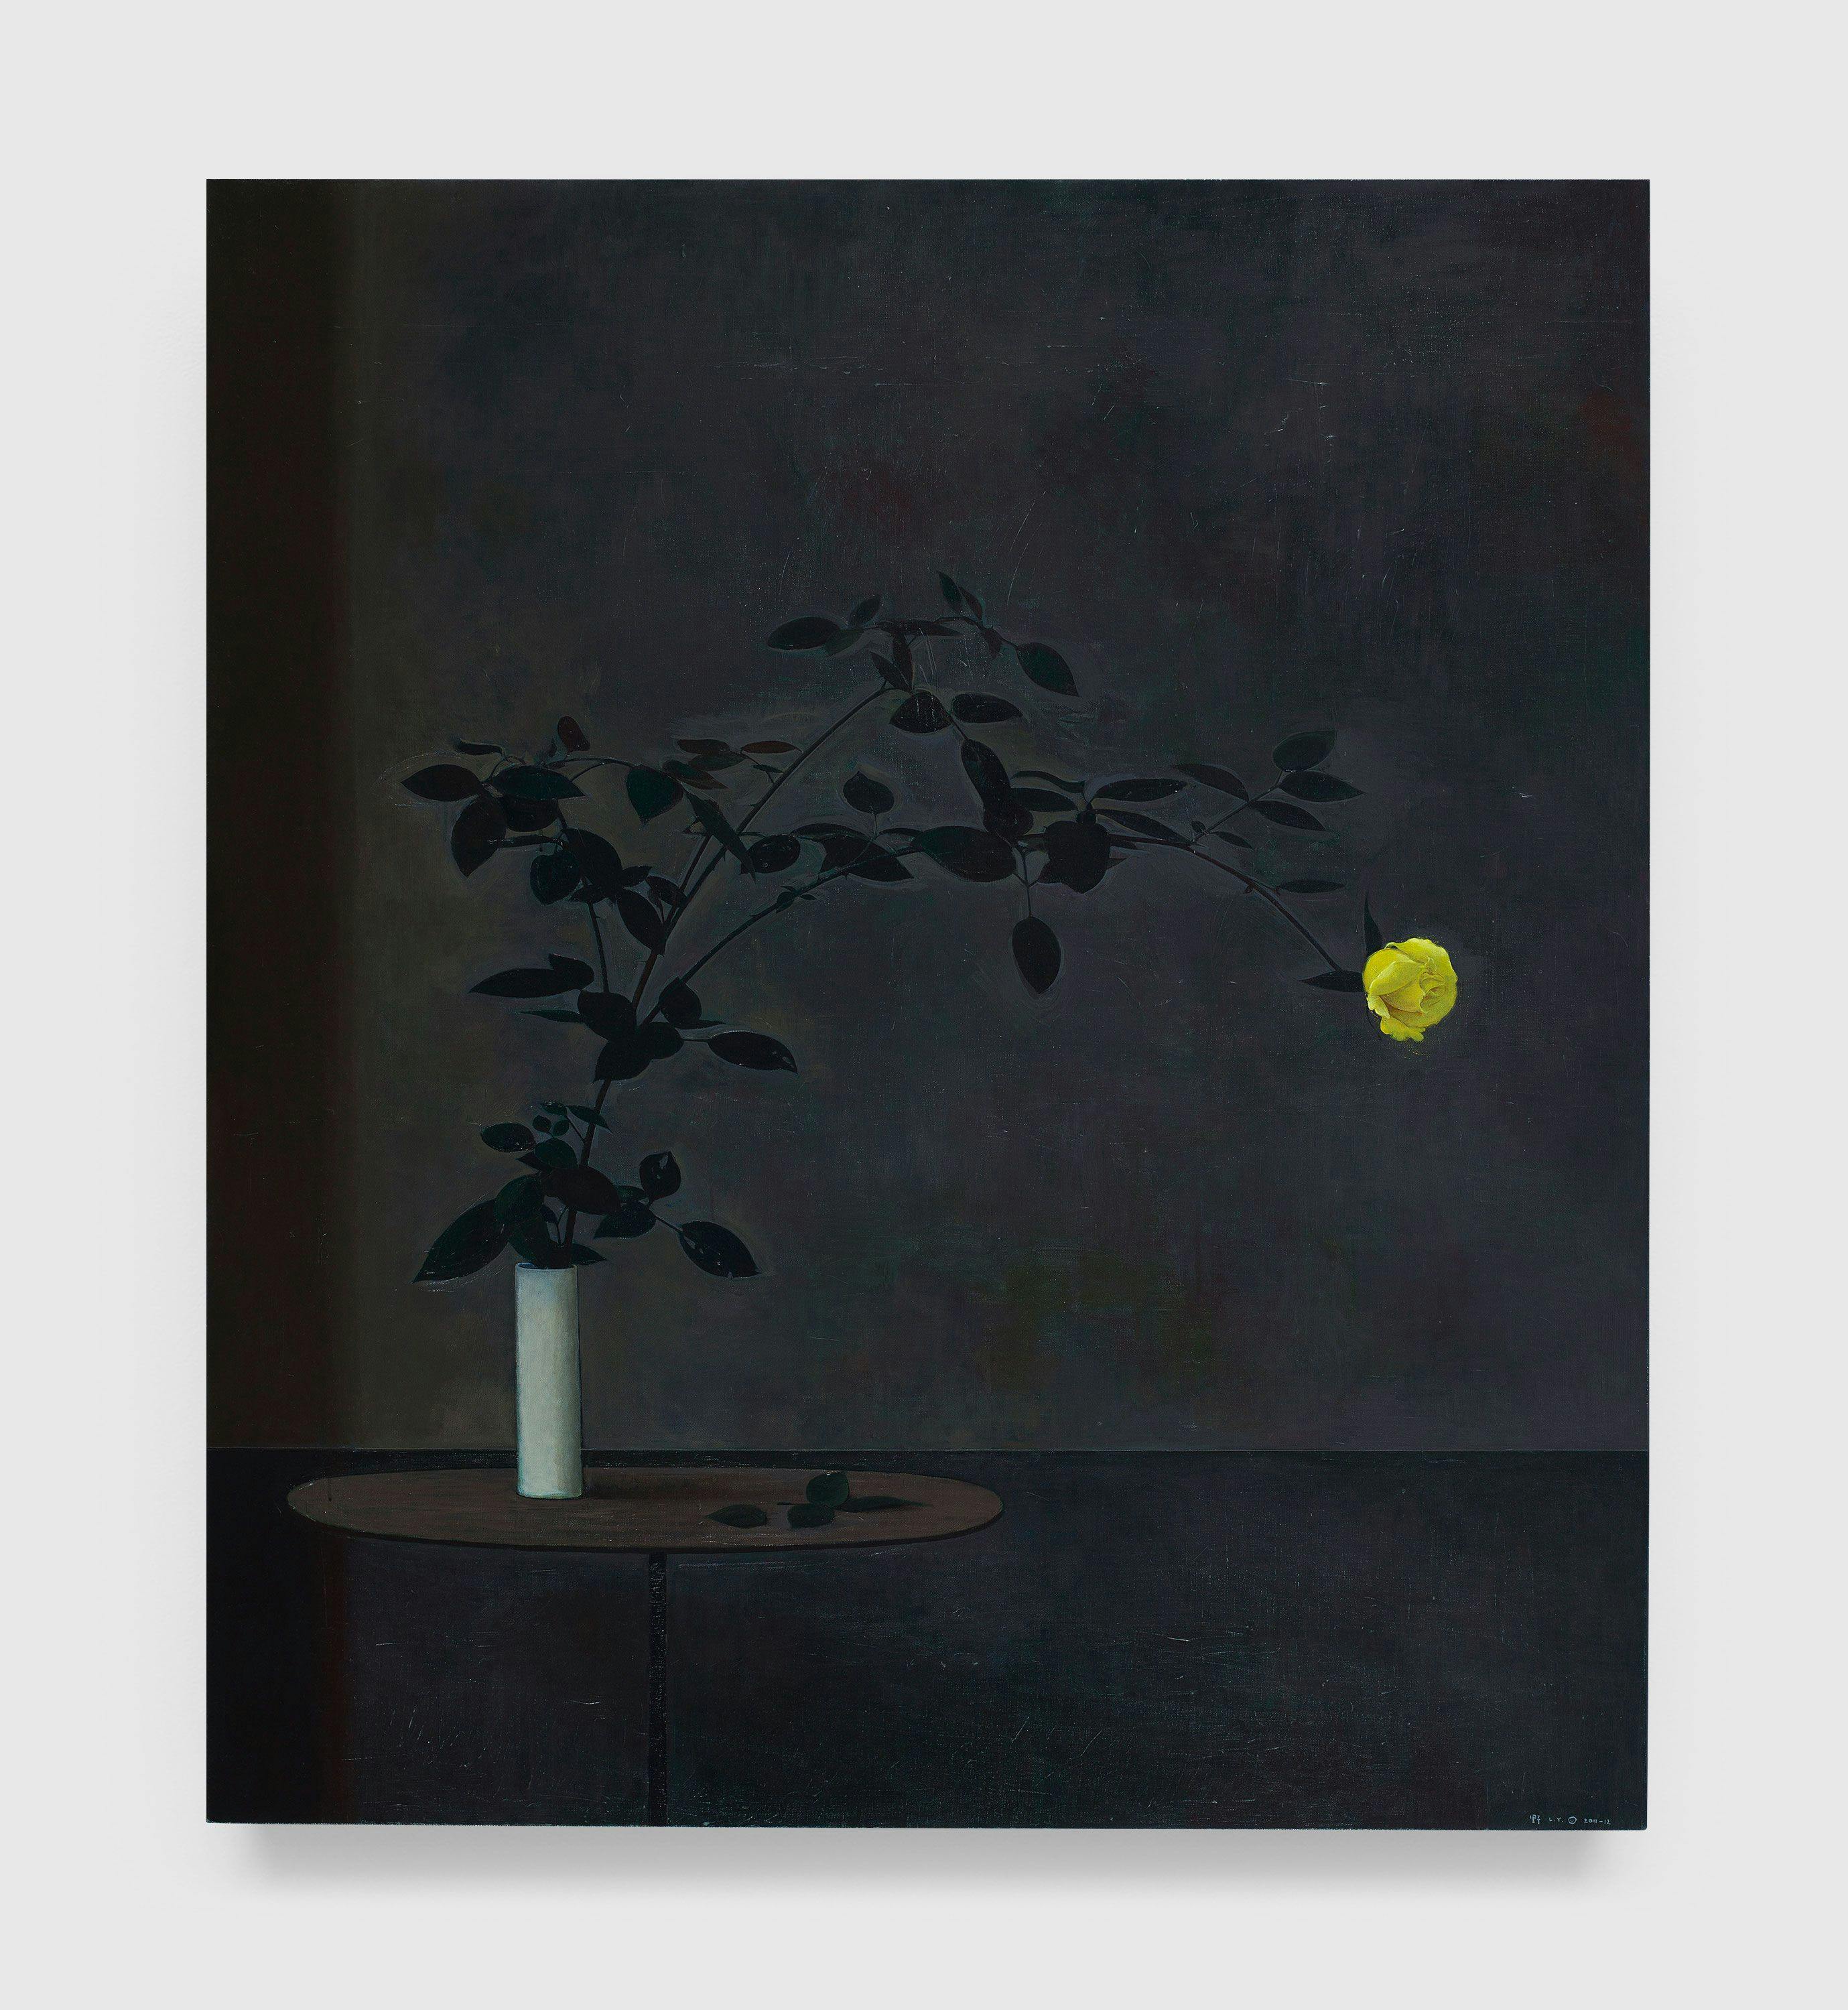 A painting by Liu Ye, titled Flower No.1, 2011 to 2012.